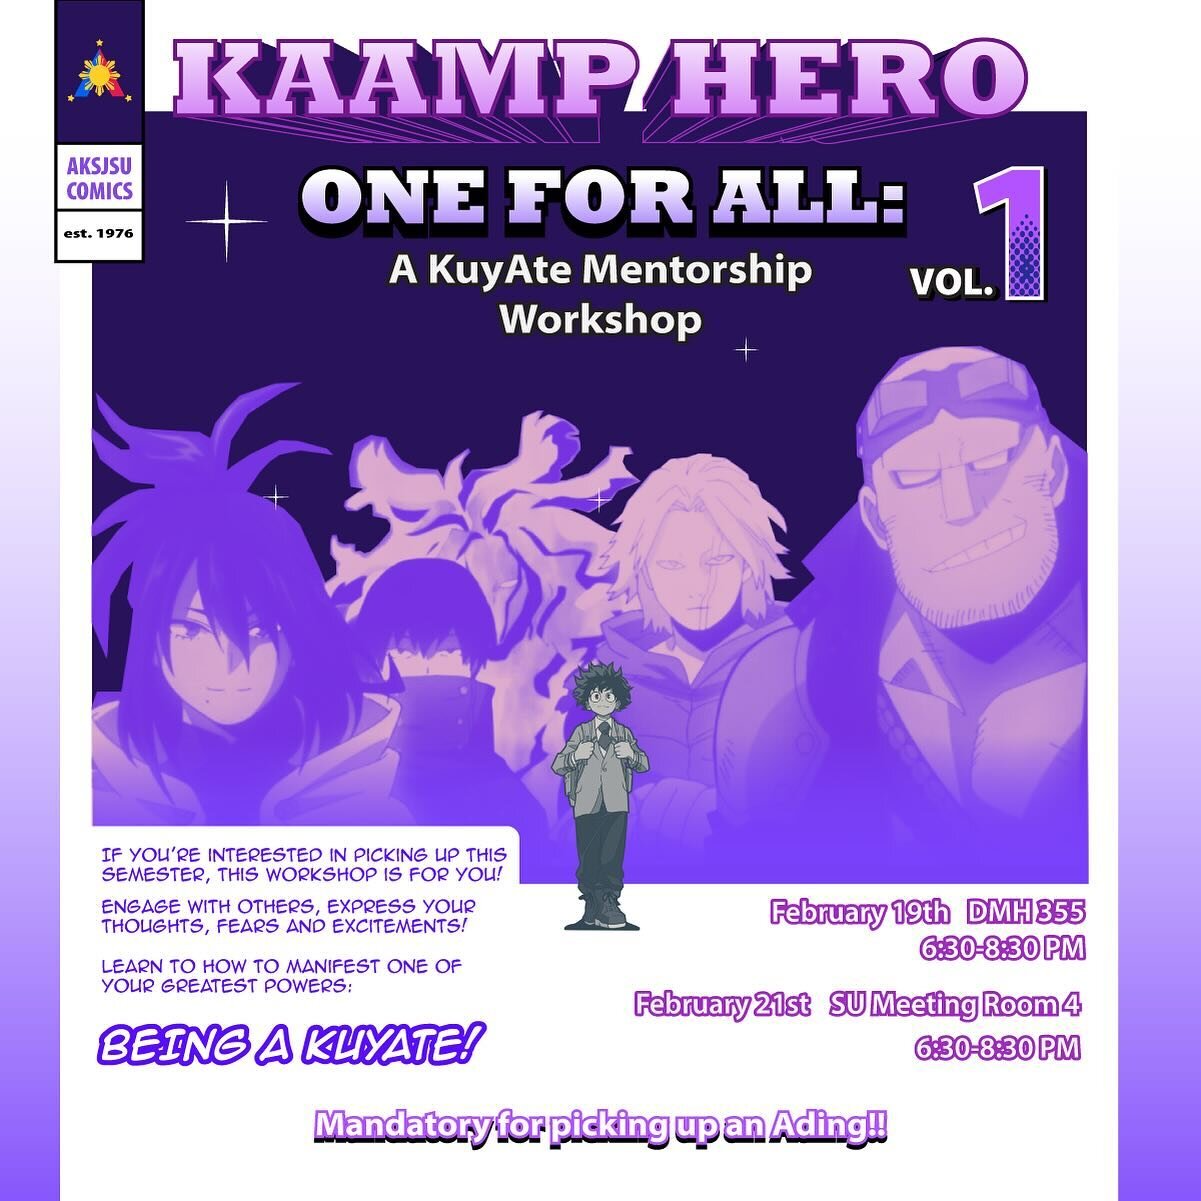 ⚡️💥CALLING ALL HEROES!!! 

We have a mission for all you KuyAtes, if you so choose to accept 🕵️ it&rsquo;s time to&hellip;PICK UP AN ADING!!!! Hero training at our KAAMP Hero 🦸 KuyAte Mentorship Workshop is MANDATORY for you to pick up an ading an